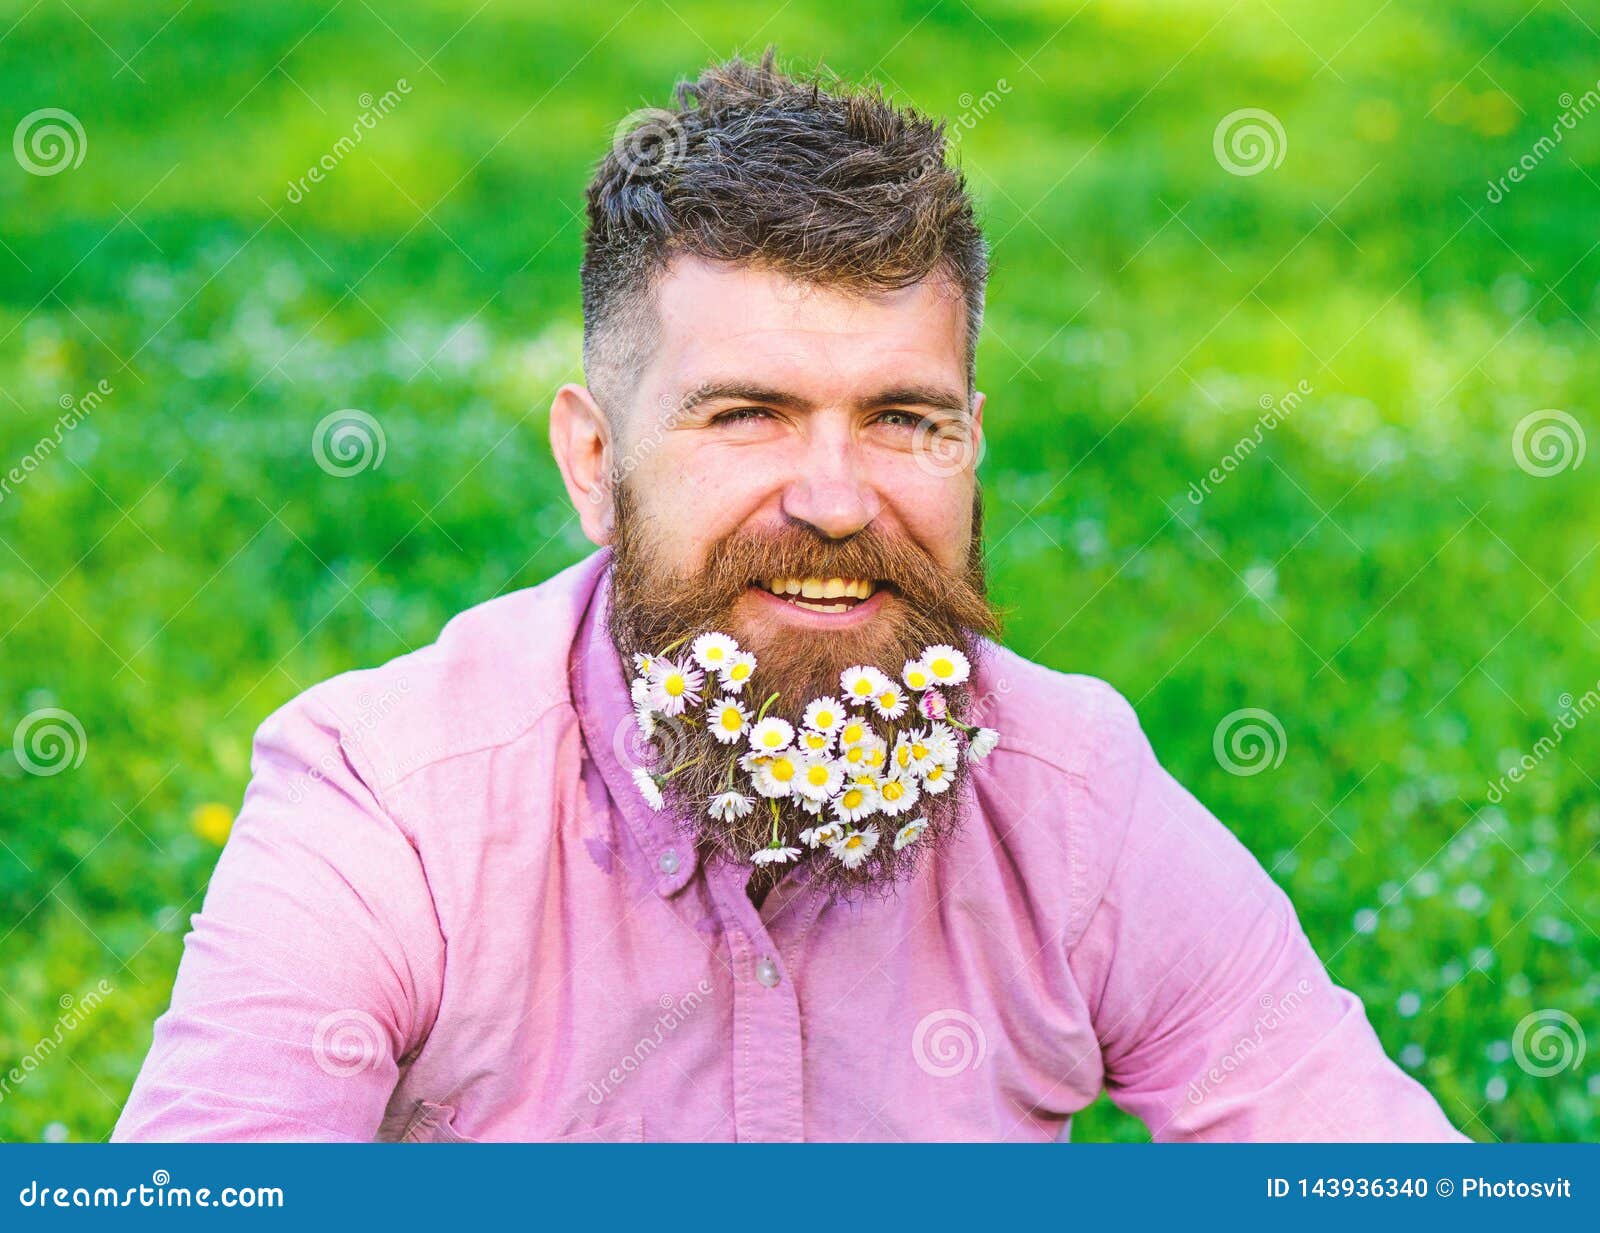 Man with Beard on Happy Face Enjoy Life in Ecologic Environment